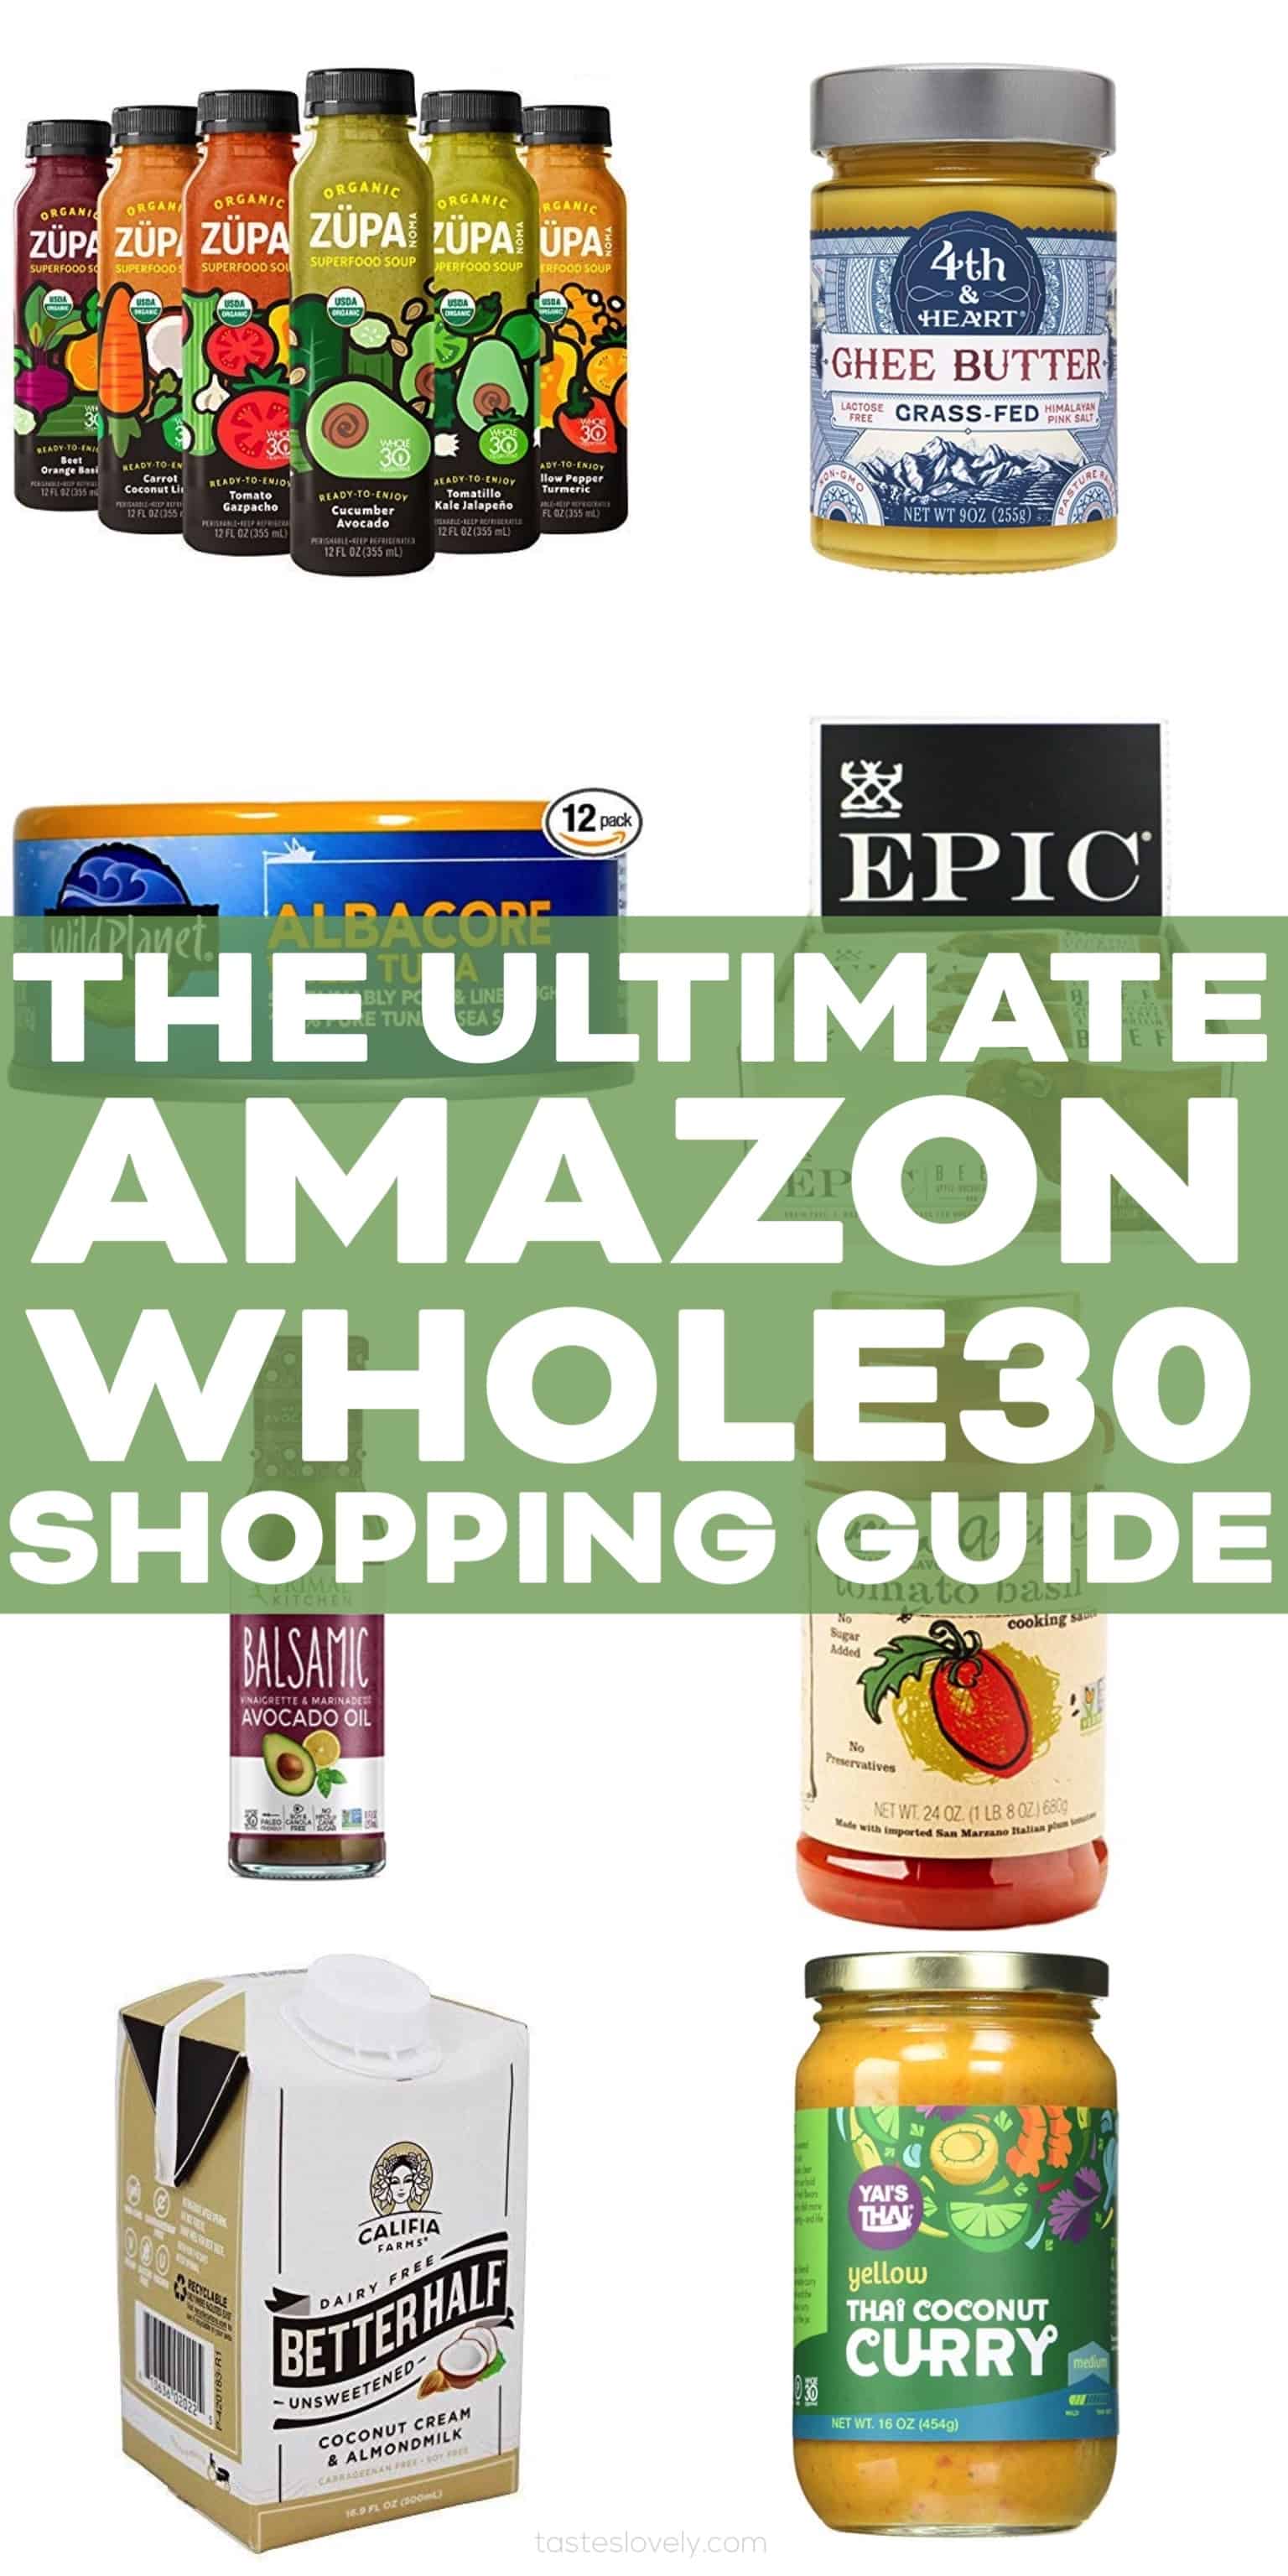 https://www.tasteslovely.com/wp-content/uploads/2018/12/The-Ultimate-Amazon-Whole30-Shopping-Guide.jpg